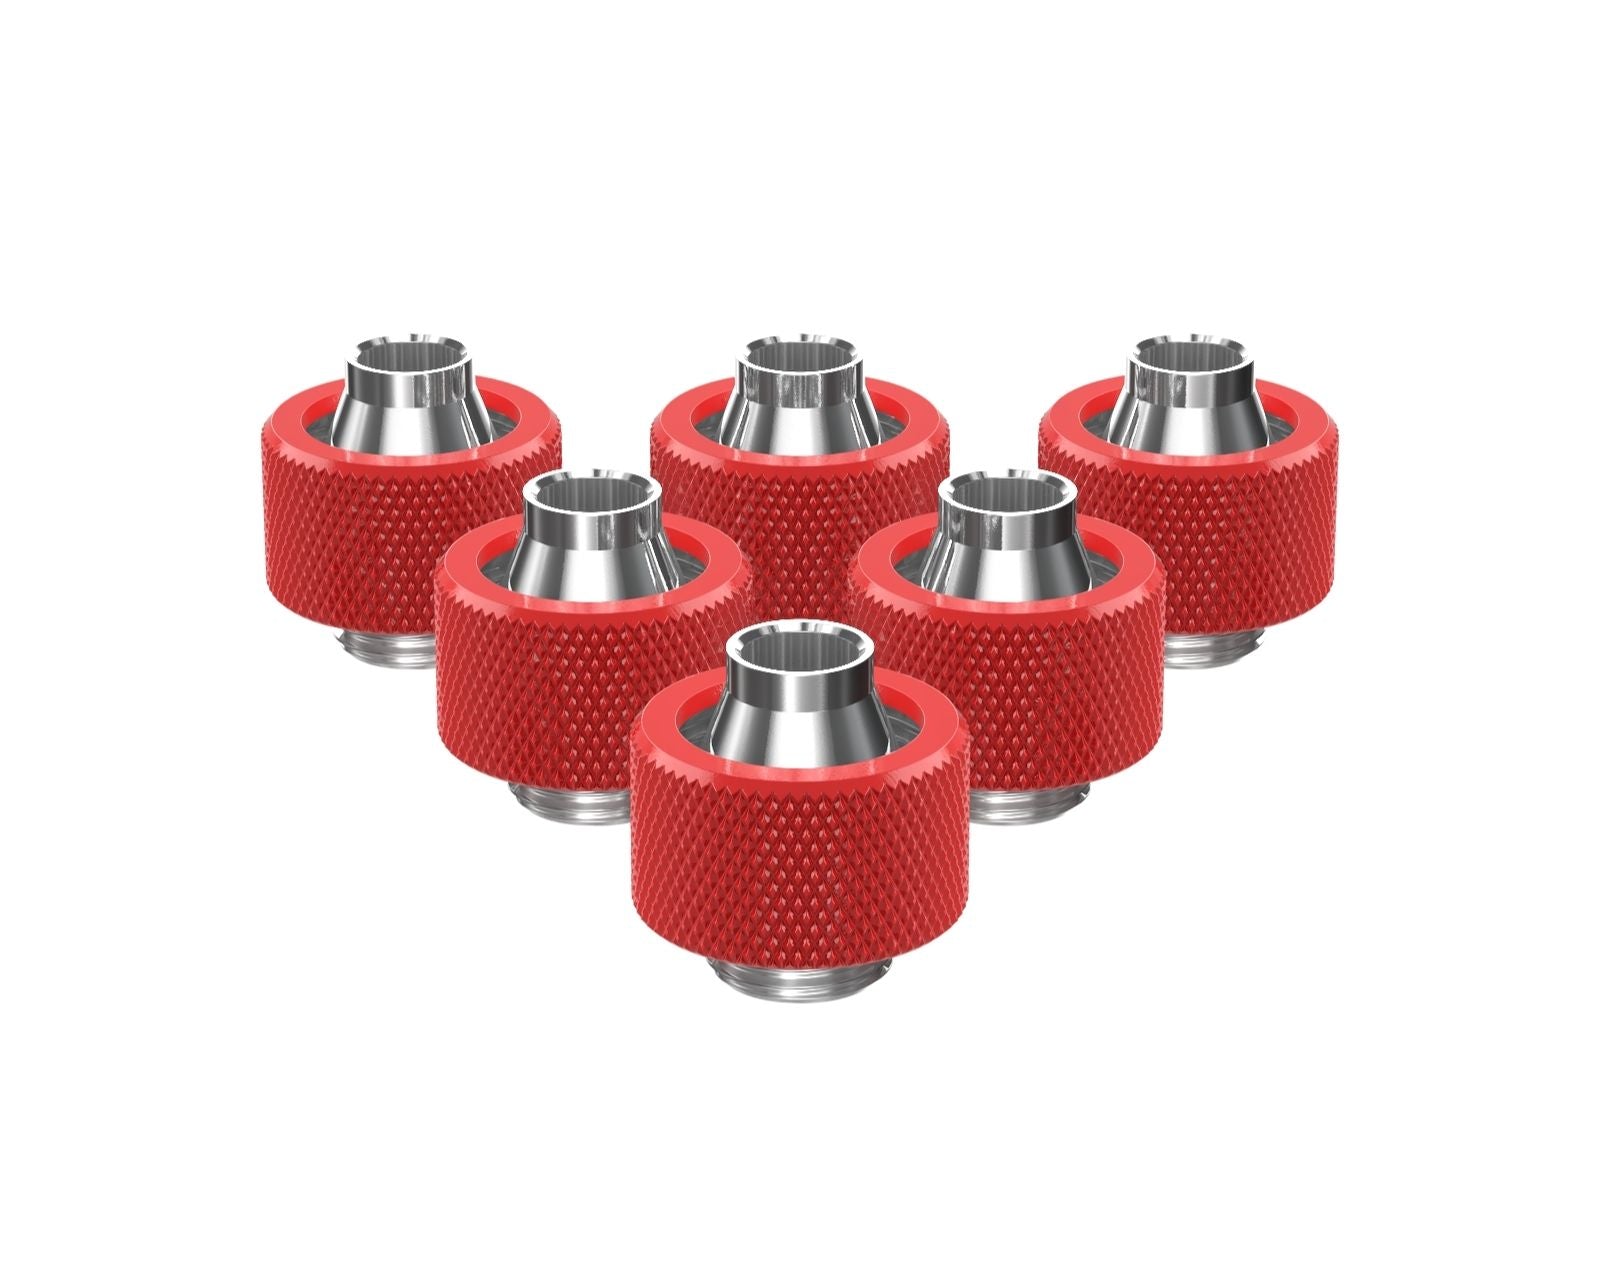 PrimoChill SecureFit SX - Premium Compression Fitting For 3/8in ID x 5/8in OD Flexible Tubing 6 Pack (F-SFSX58-6) - Available in 20+ Colors, Custom Watercooling Loop Ready - Razor Red